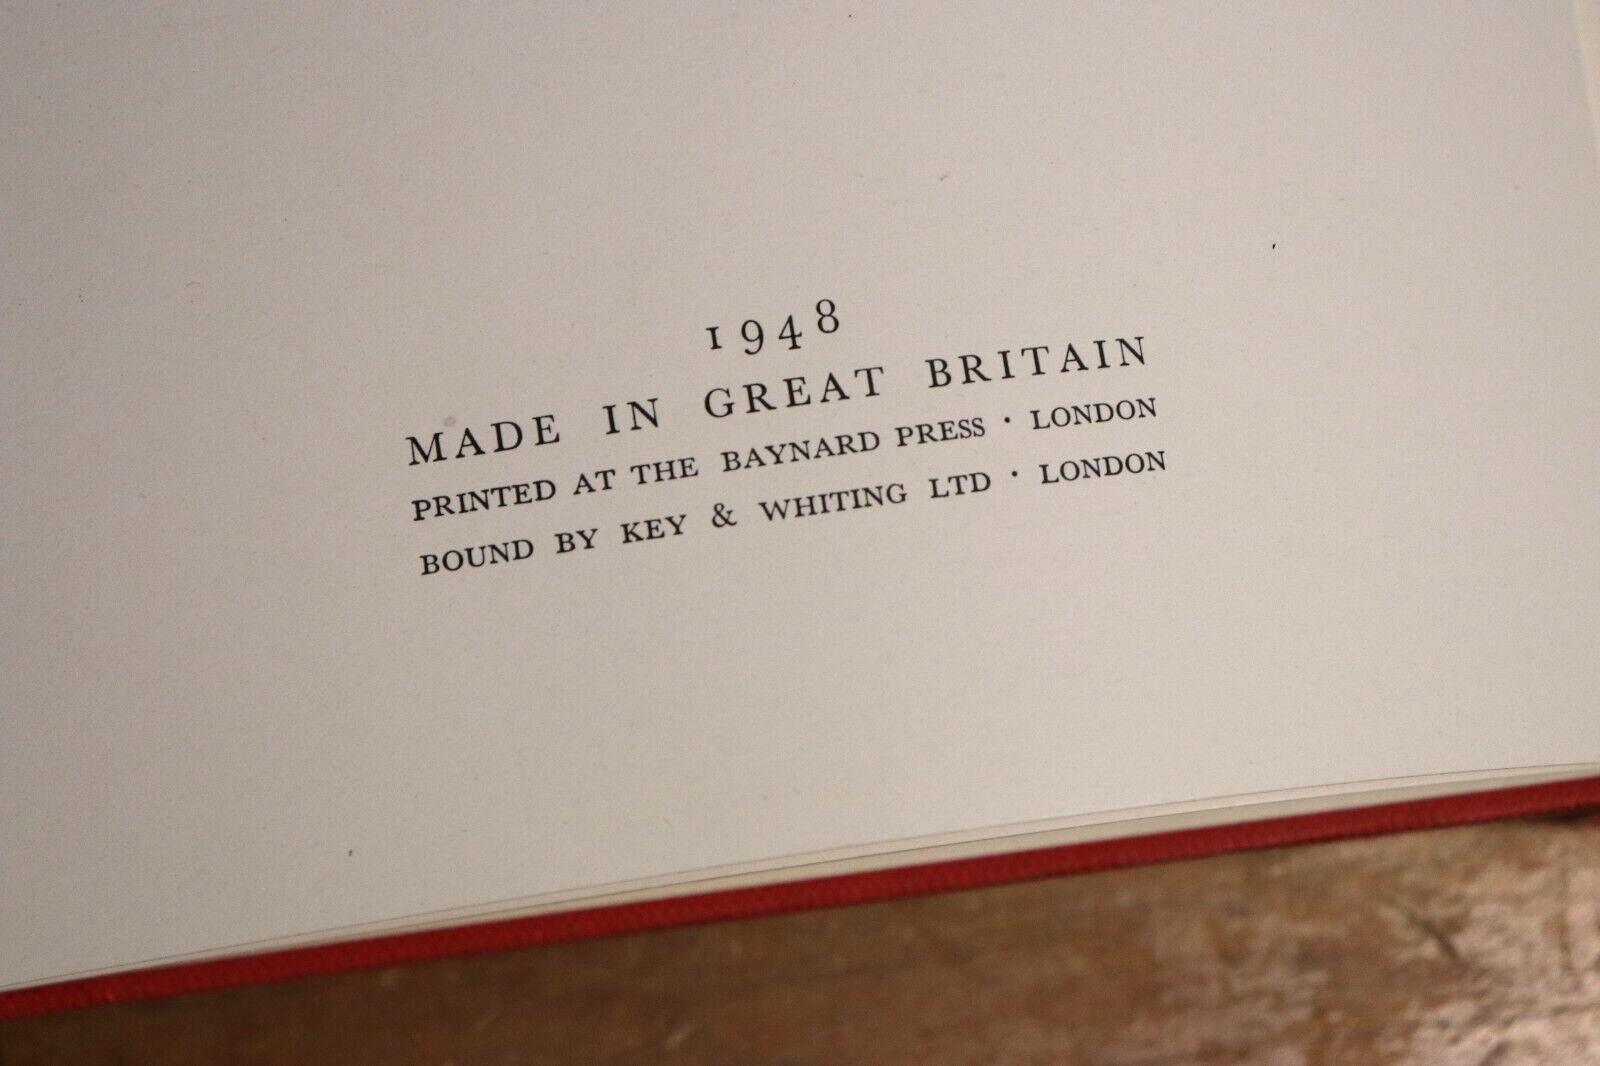 1948 3vol Drawings At Windsor Castle 1st Edition Antique British Art Books